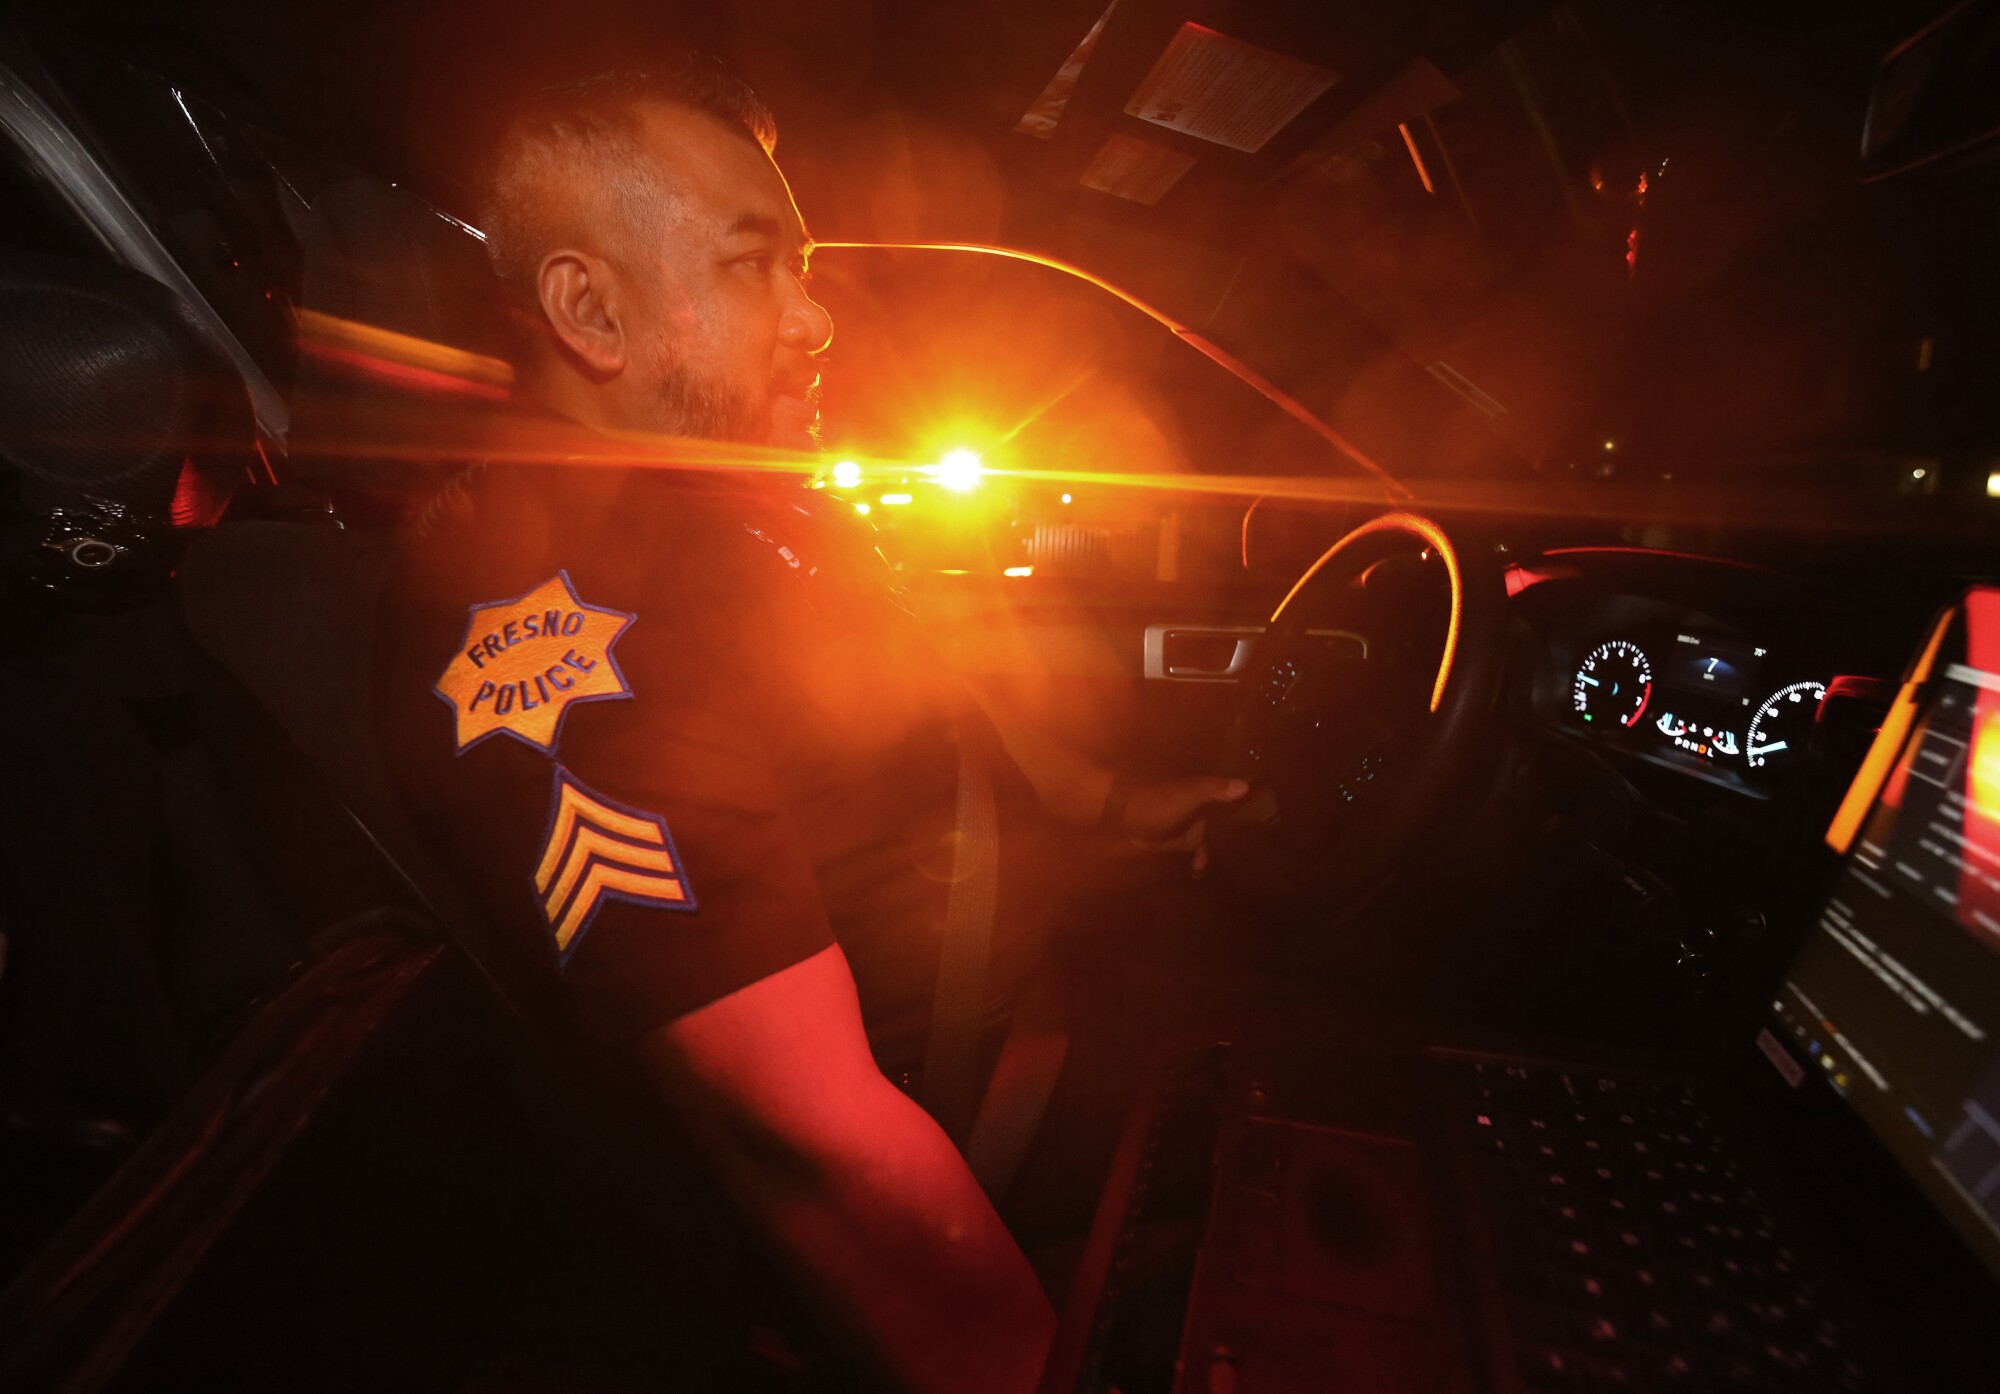 Danny Kim is on duty at the Fresno Police Department.